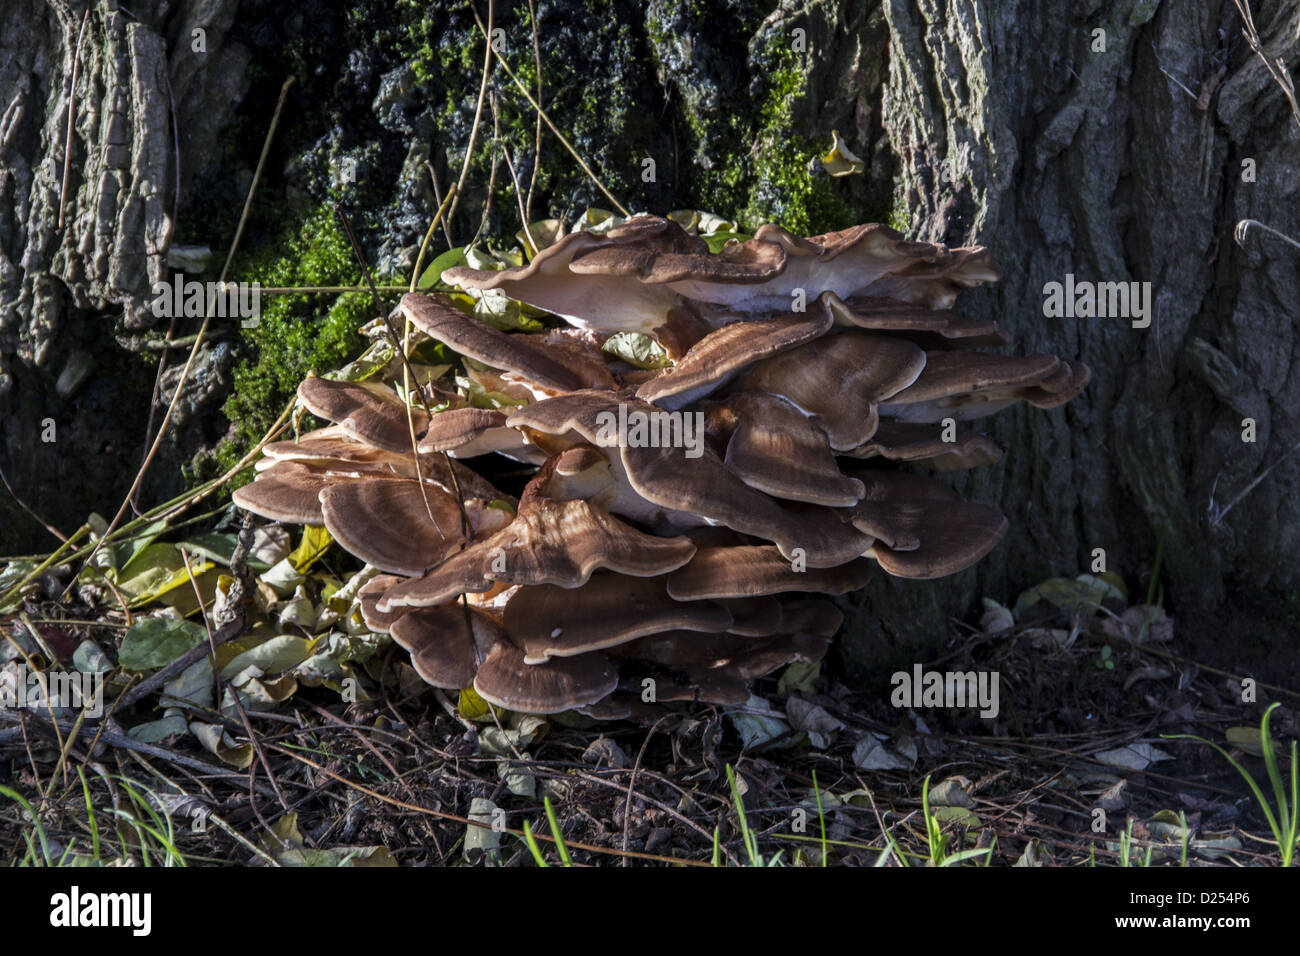 Grifola frondosa polypore mushroom that grows in clusters base trees such one False Acacia mushroom commonly known Stock Photo